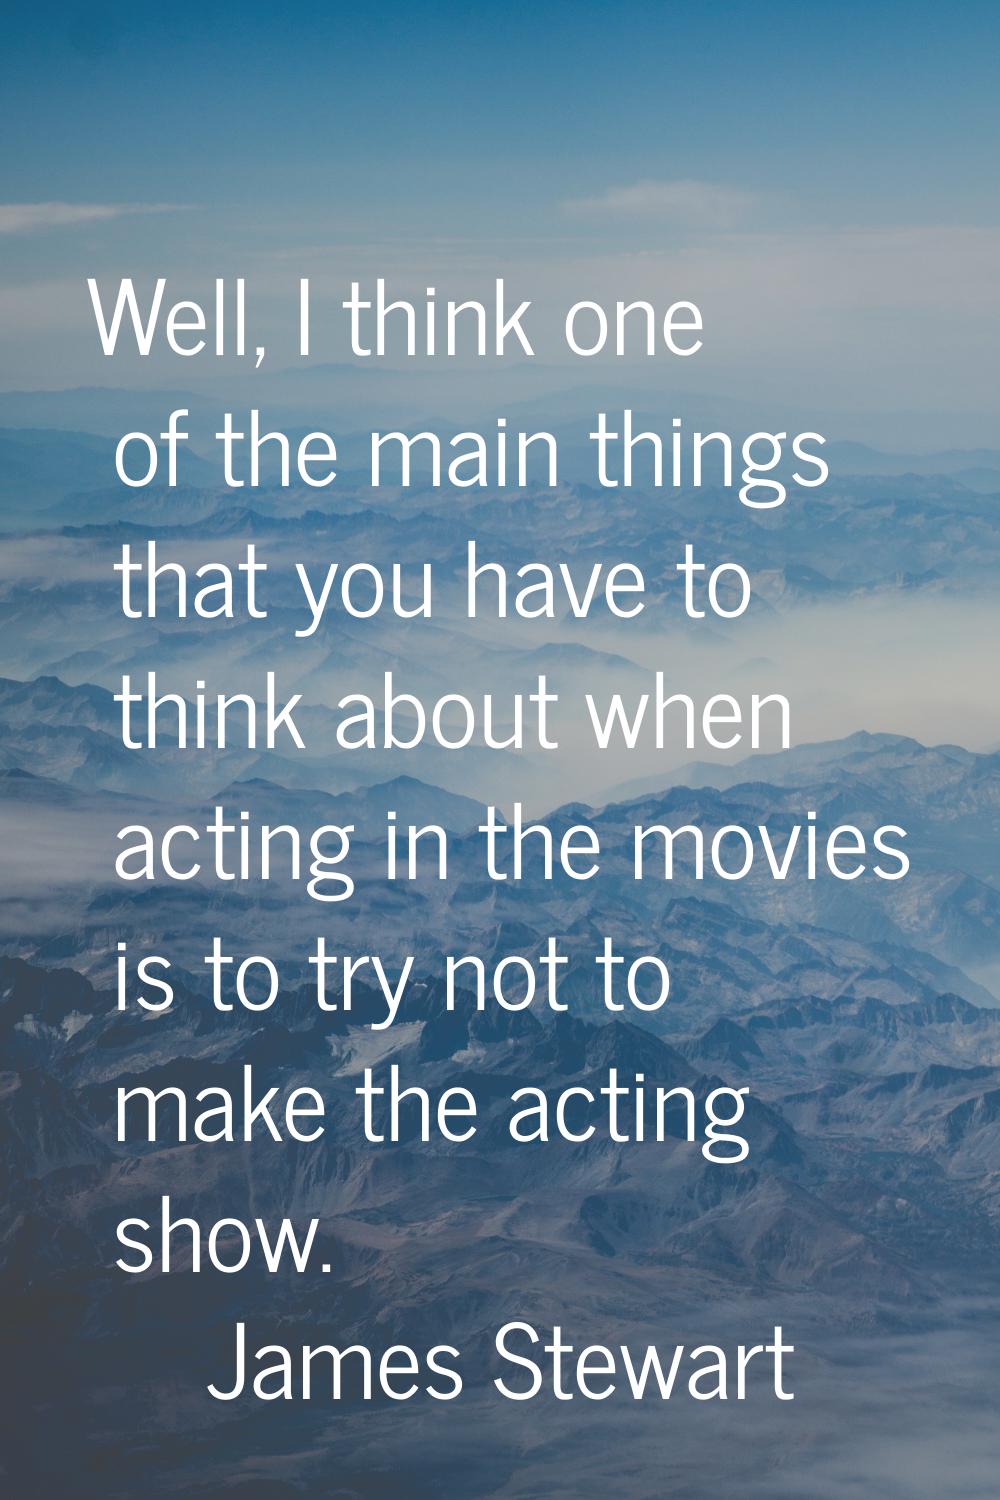 Well, I think one of the main things that you have to think about when acting in the movies is to t